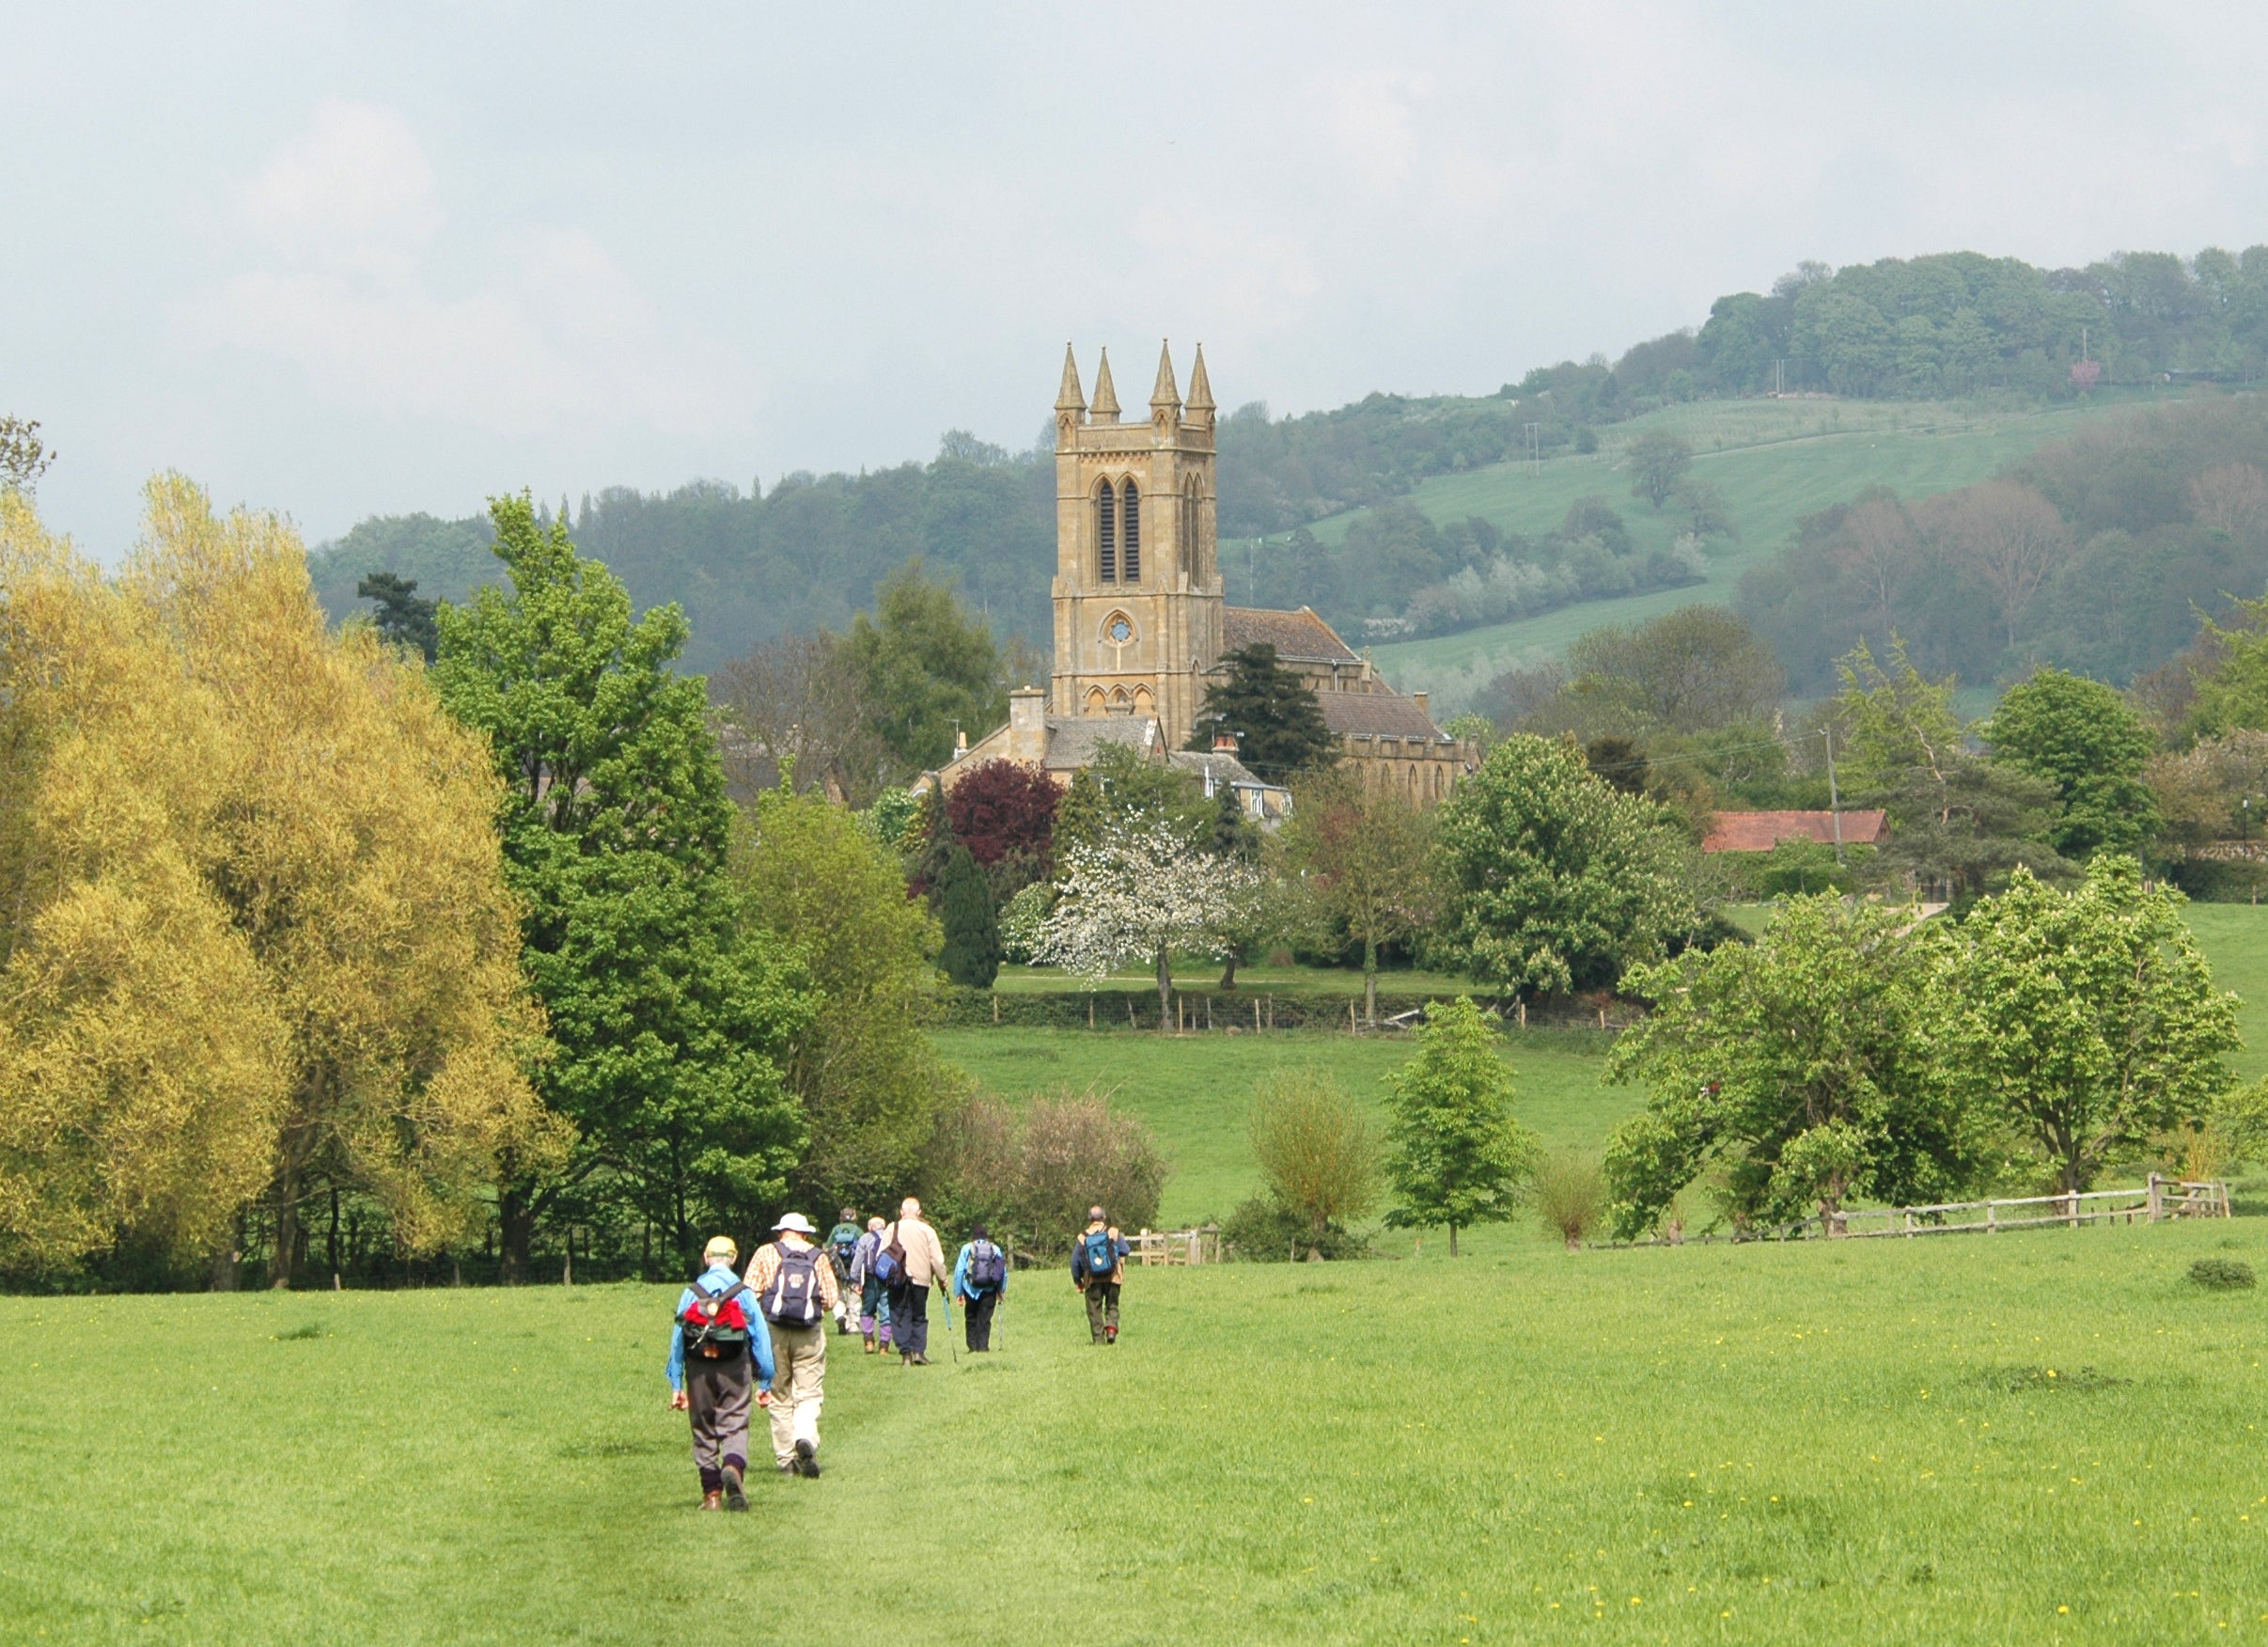 This National Trail extends from Chipping Campden to the Roman city of Bath